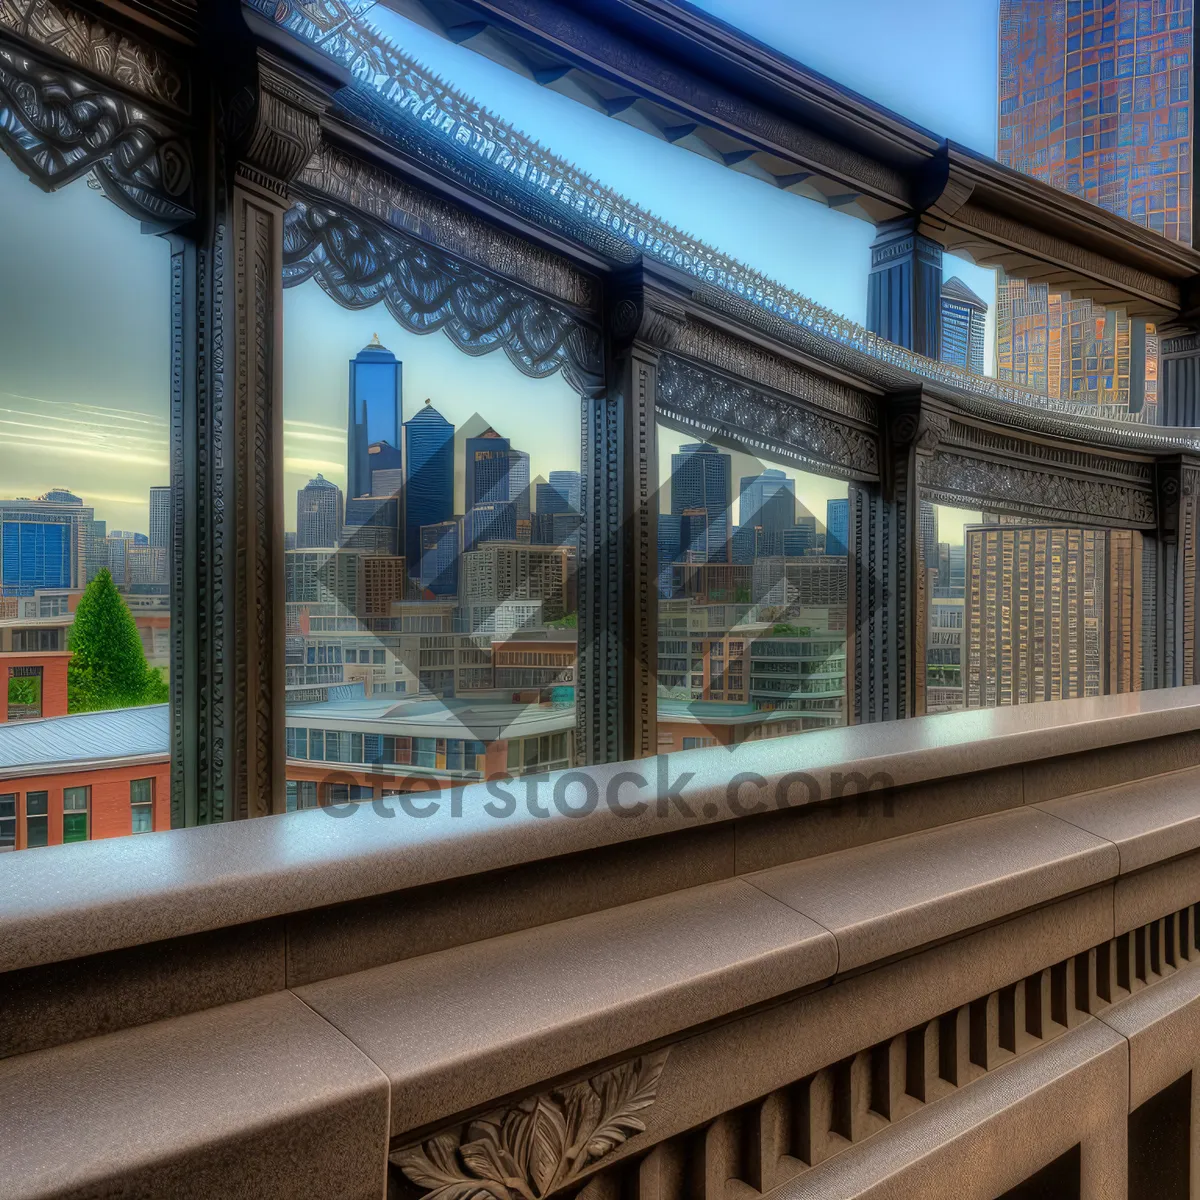 Picture of Urban Library with Columns and City View